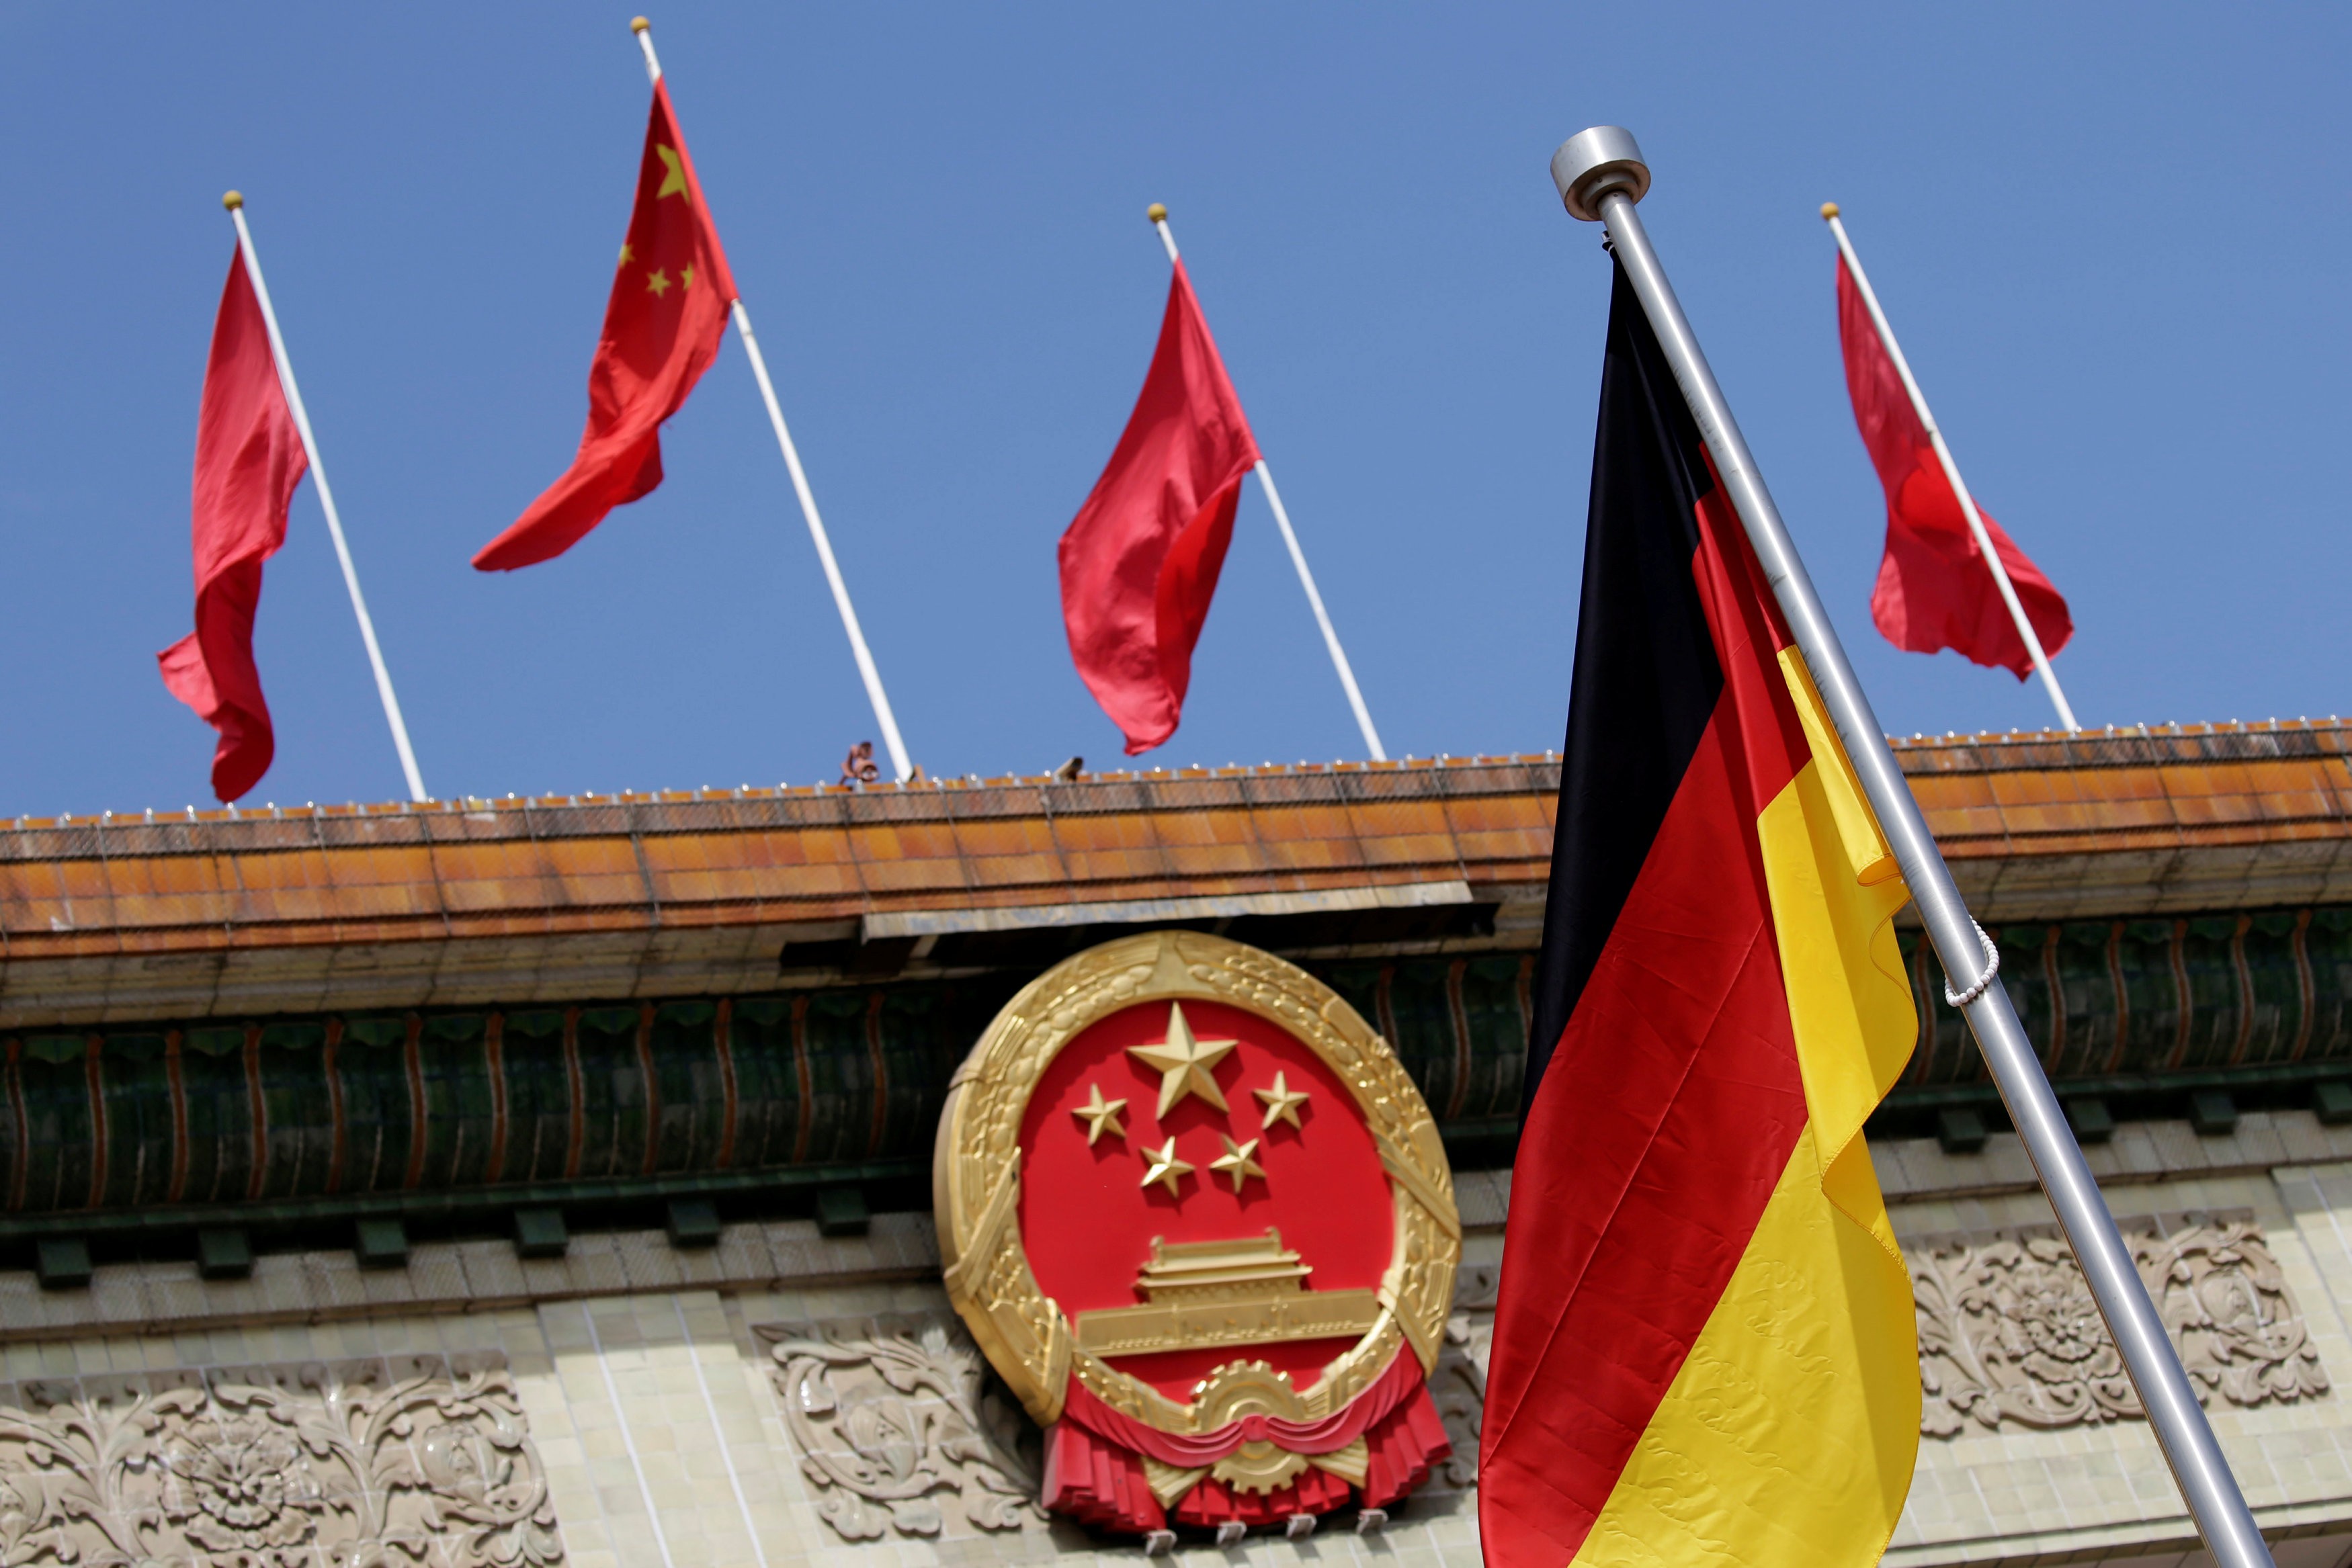 A China-led wave of company acquisitions has seen Berlin grow leery of granting market access to foreign investors. But fears of an exodus of tech know-how are balanced by a desire to do business on the mainland